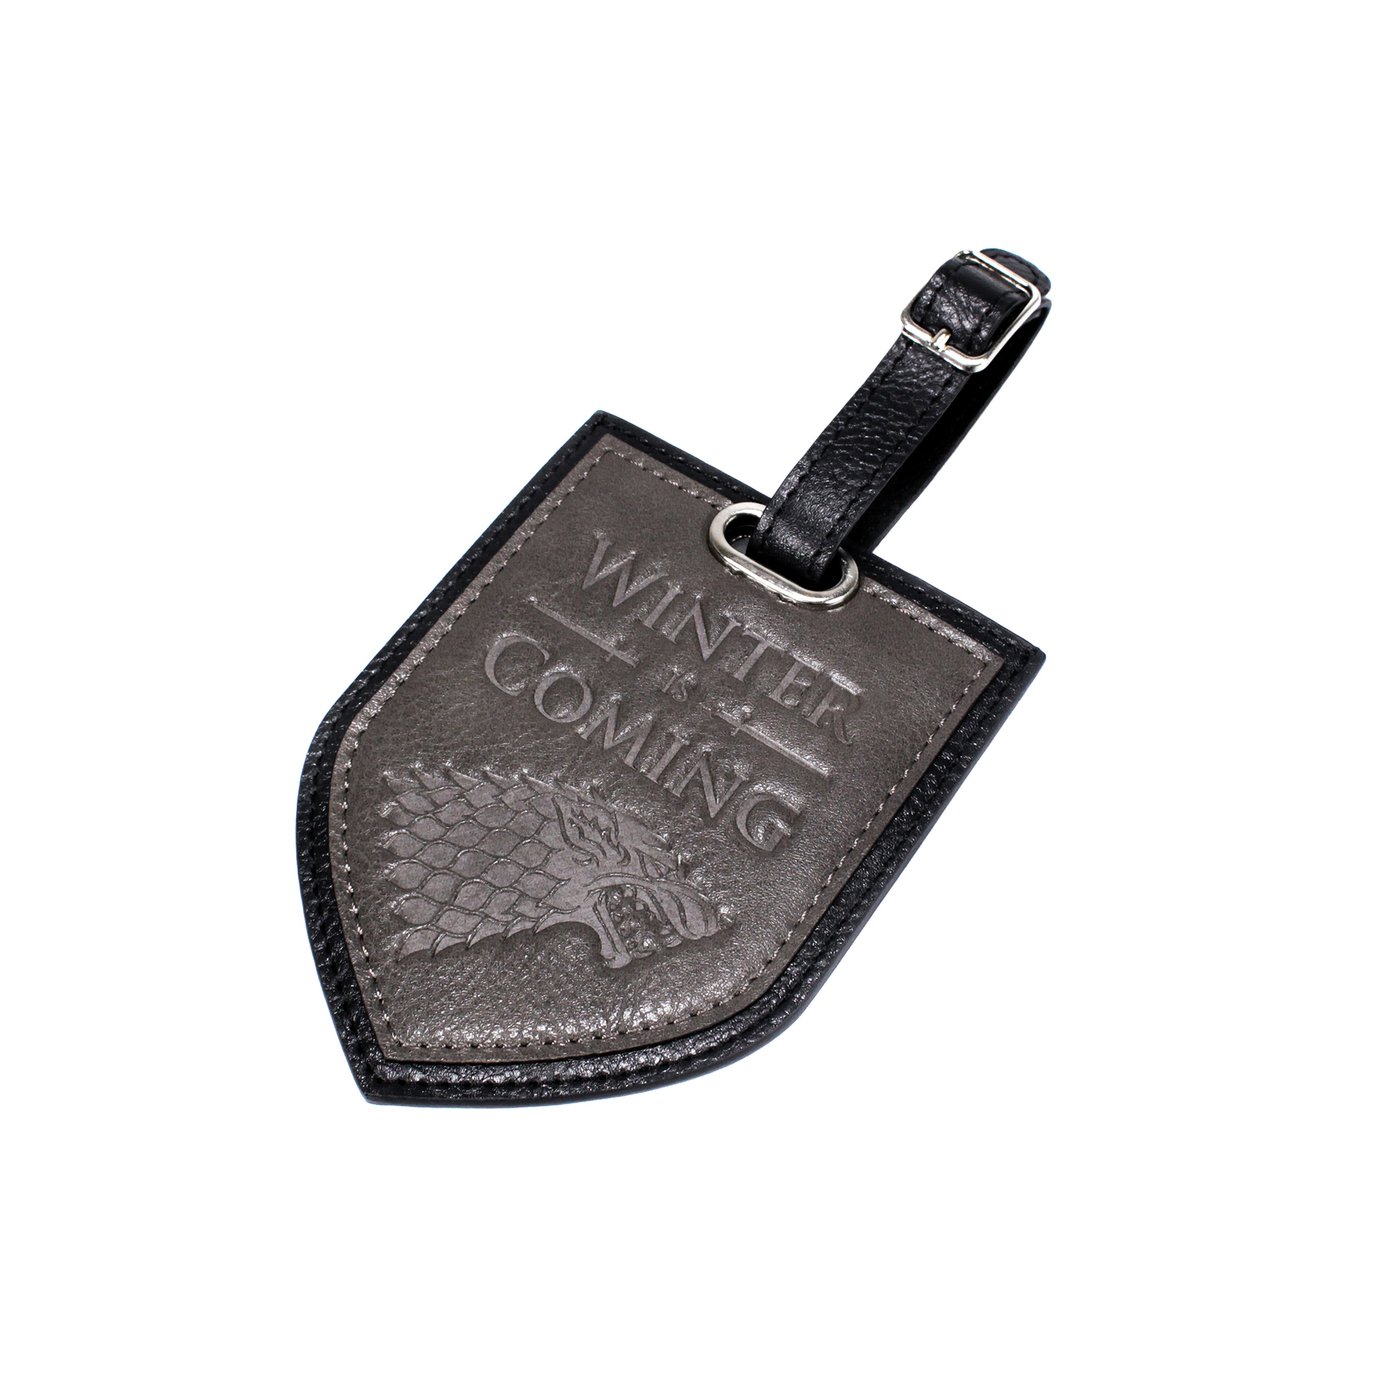 Game of Thrones Winter Is Coming Luggage Tag